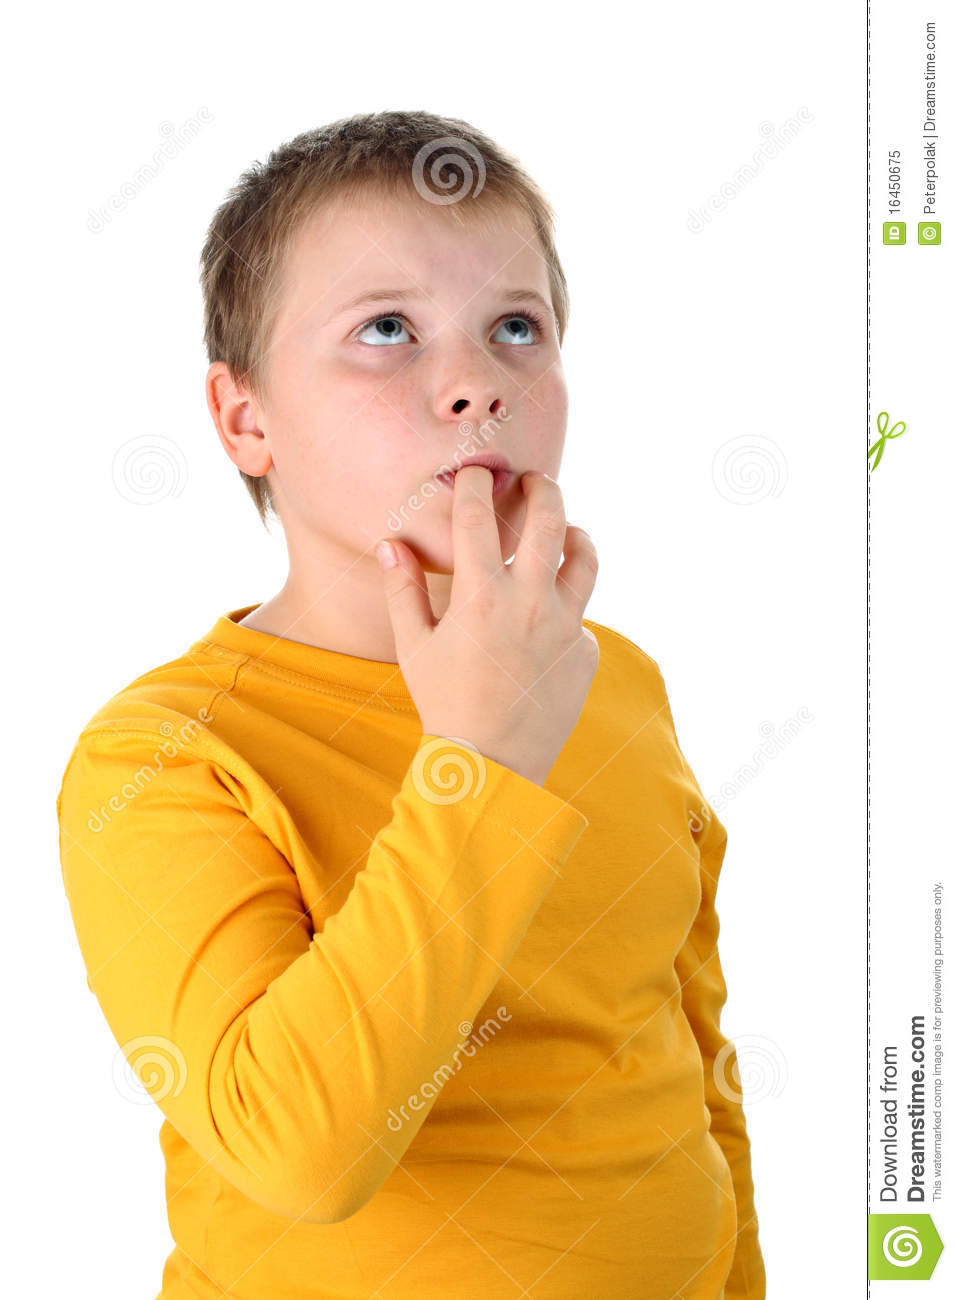 Portrait Of Preteen Boy Tasting Some Food With His Finger Looking Up    